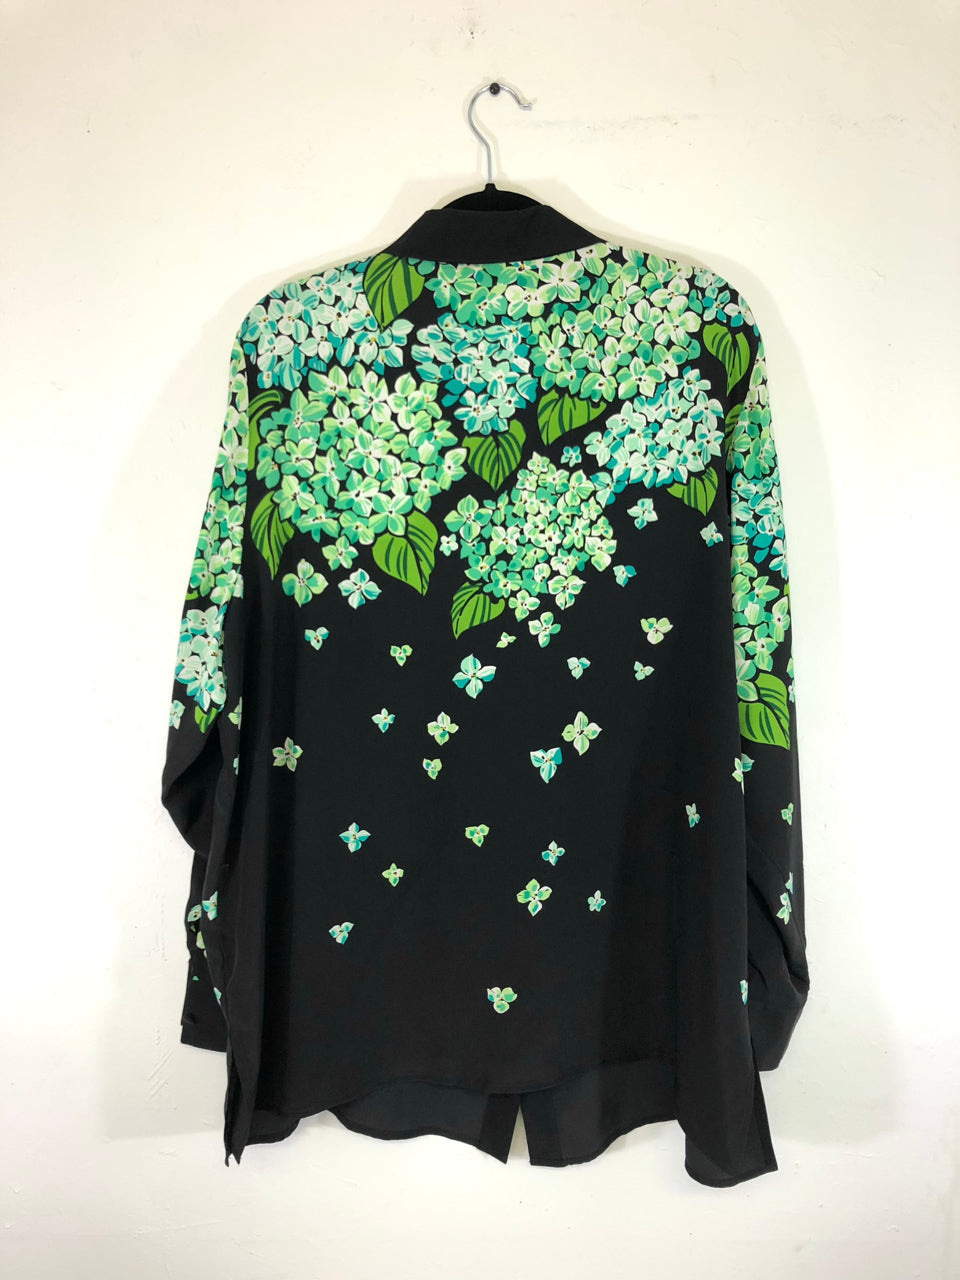 Bob Mackie Floral Sequined & Beaded Blouse (Variation 1)